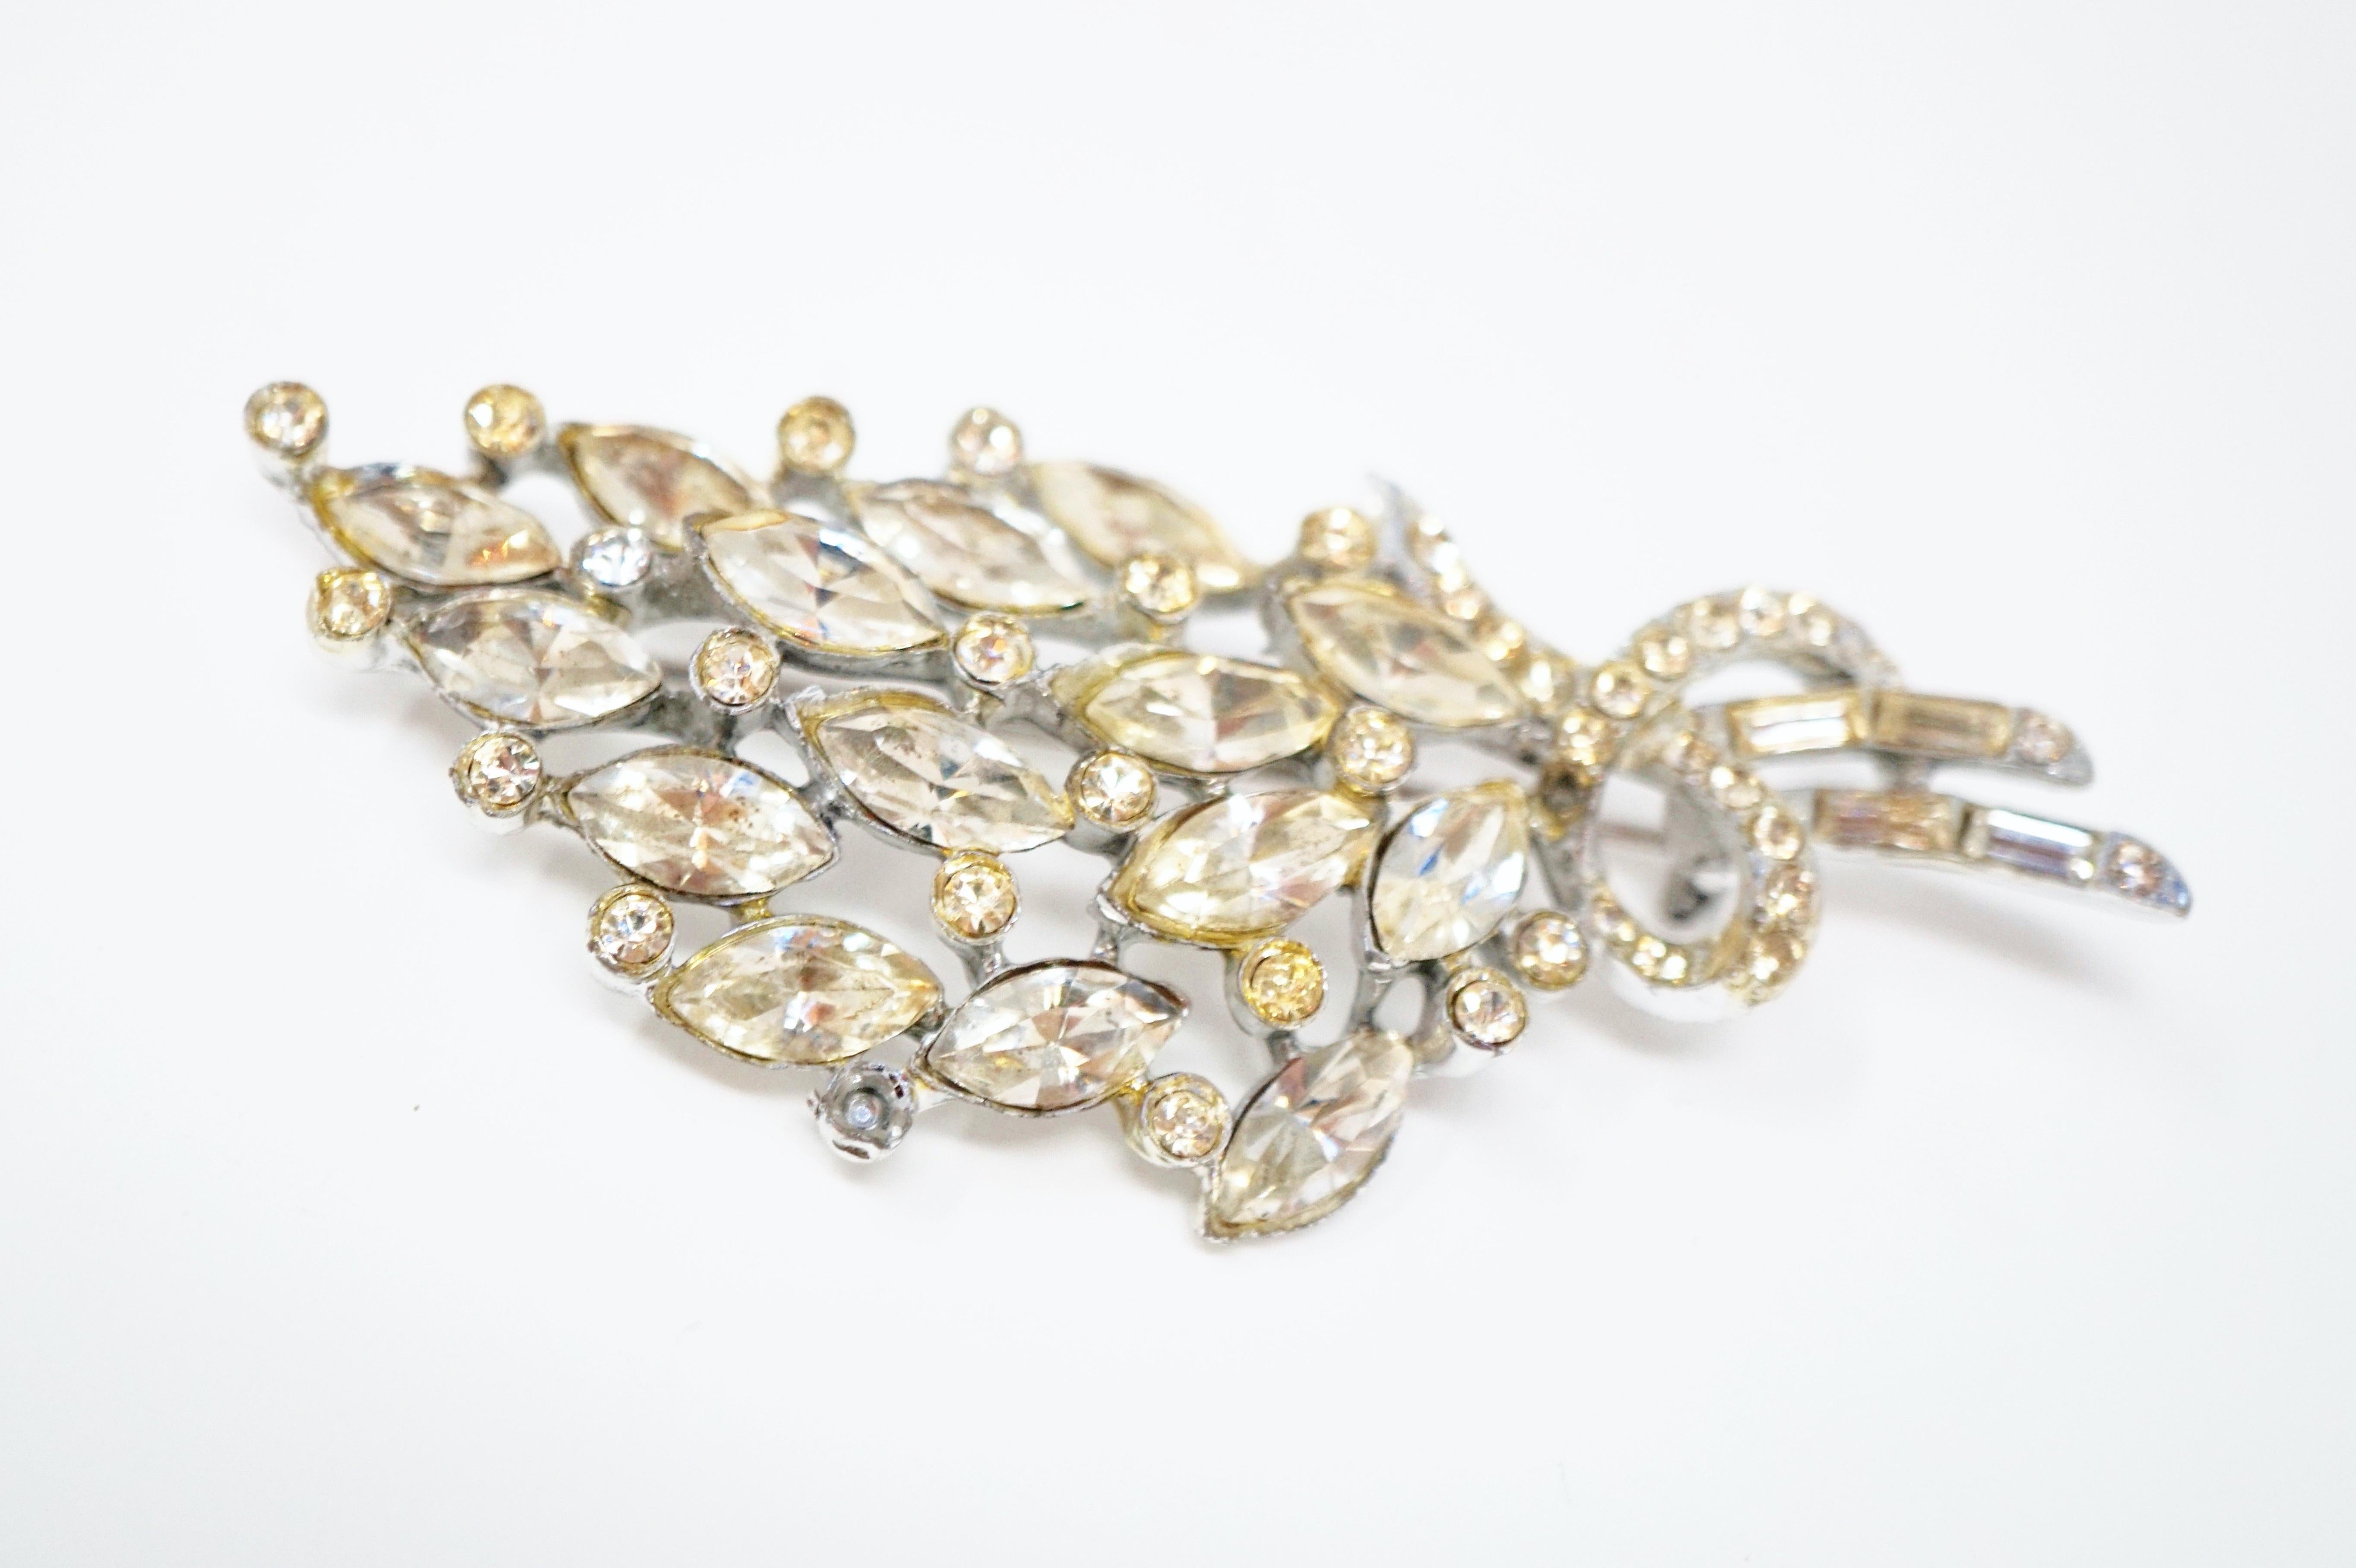 Beautiful vintage crystal rhinestone bouquet brooch with silver tone hardware, circa 1950s. A classic accessory for wedding or formal looks. This brooch is comprised of a medley of sparkling baguette, marquise and round crystal rhinestones in a